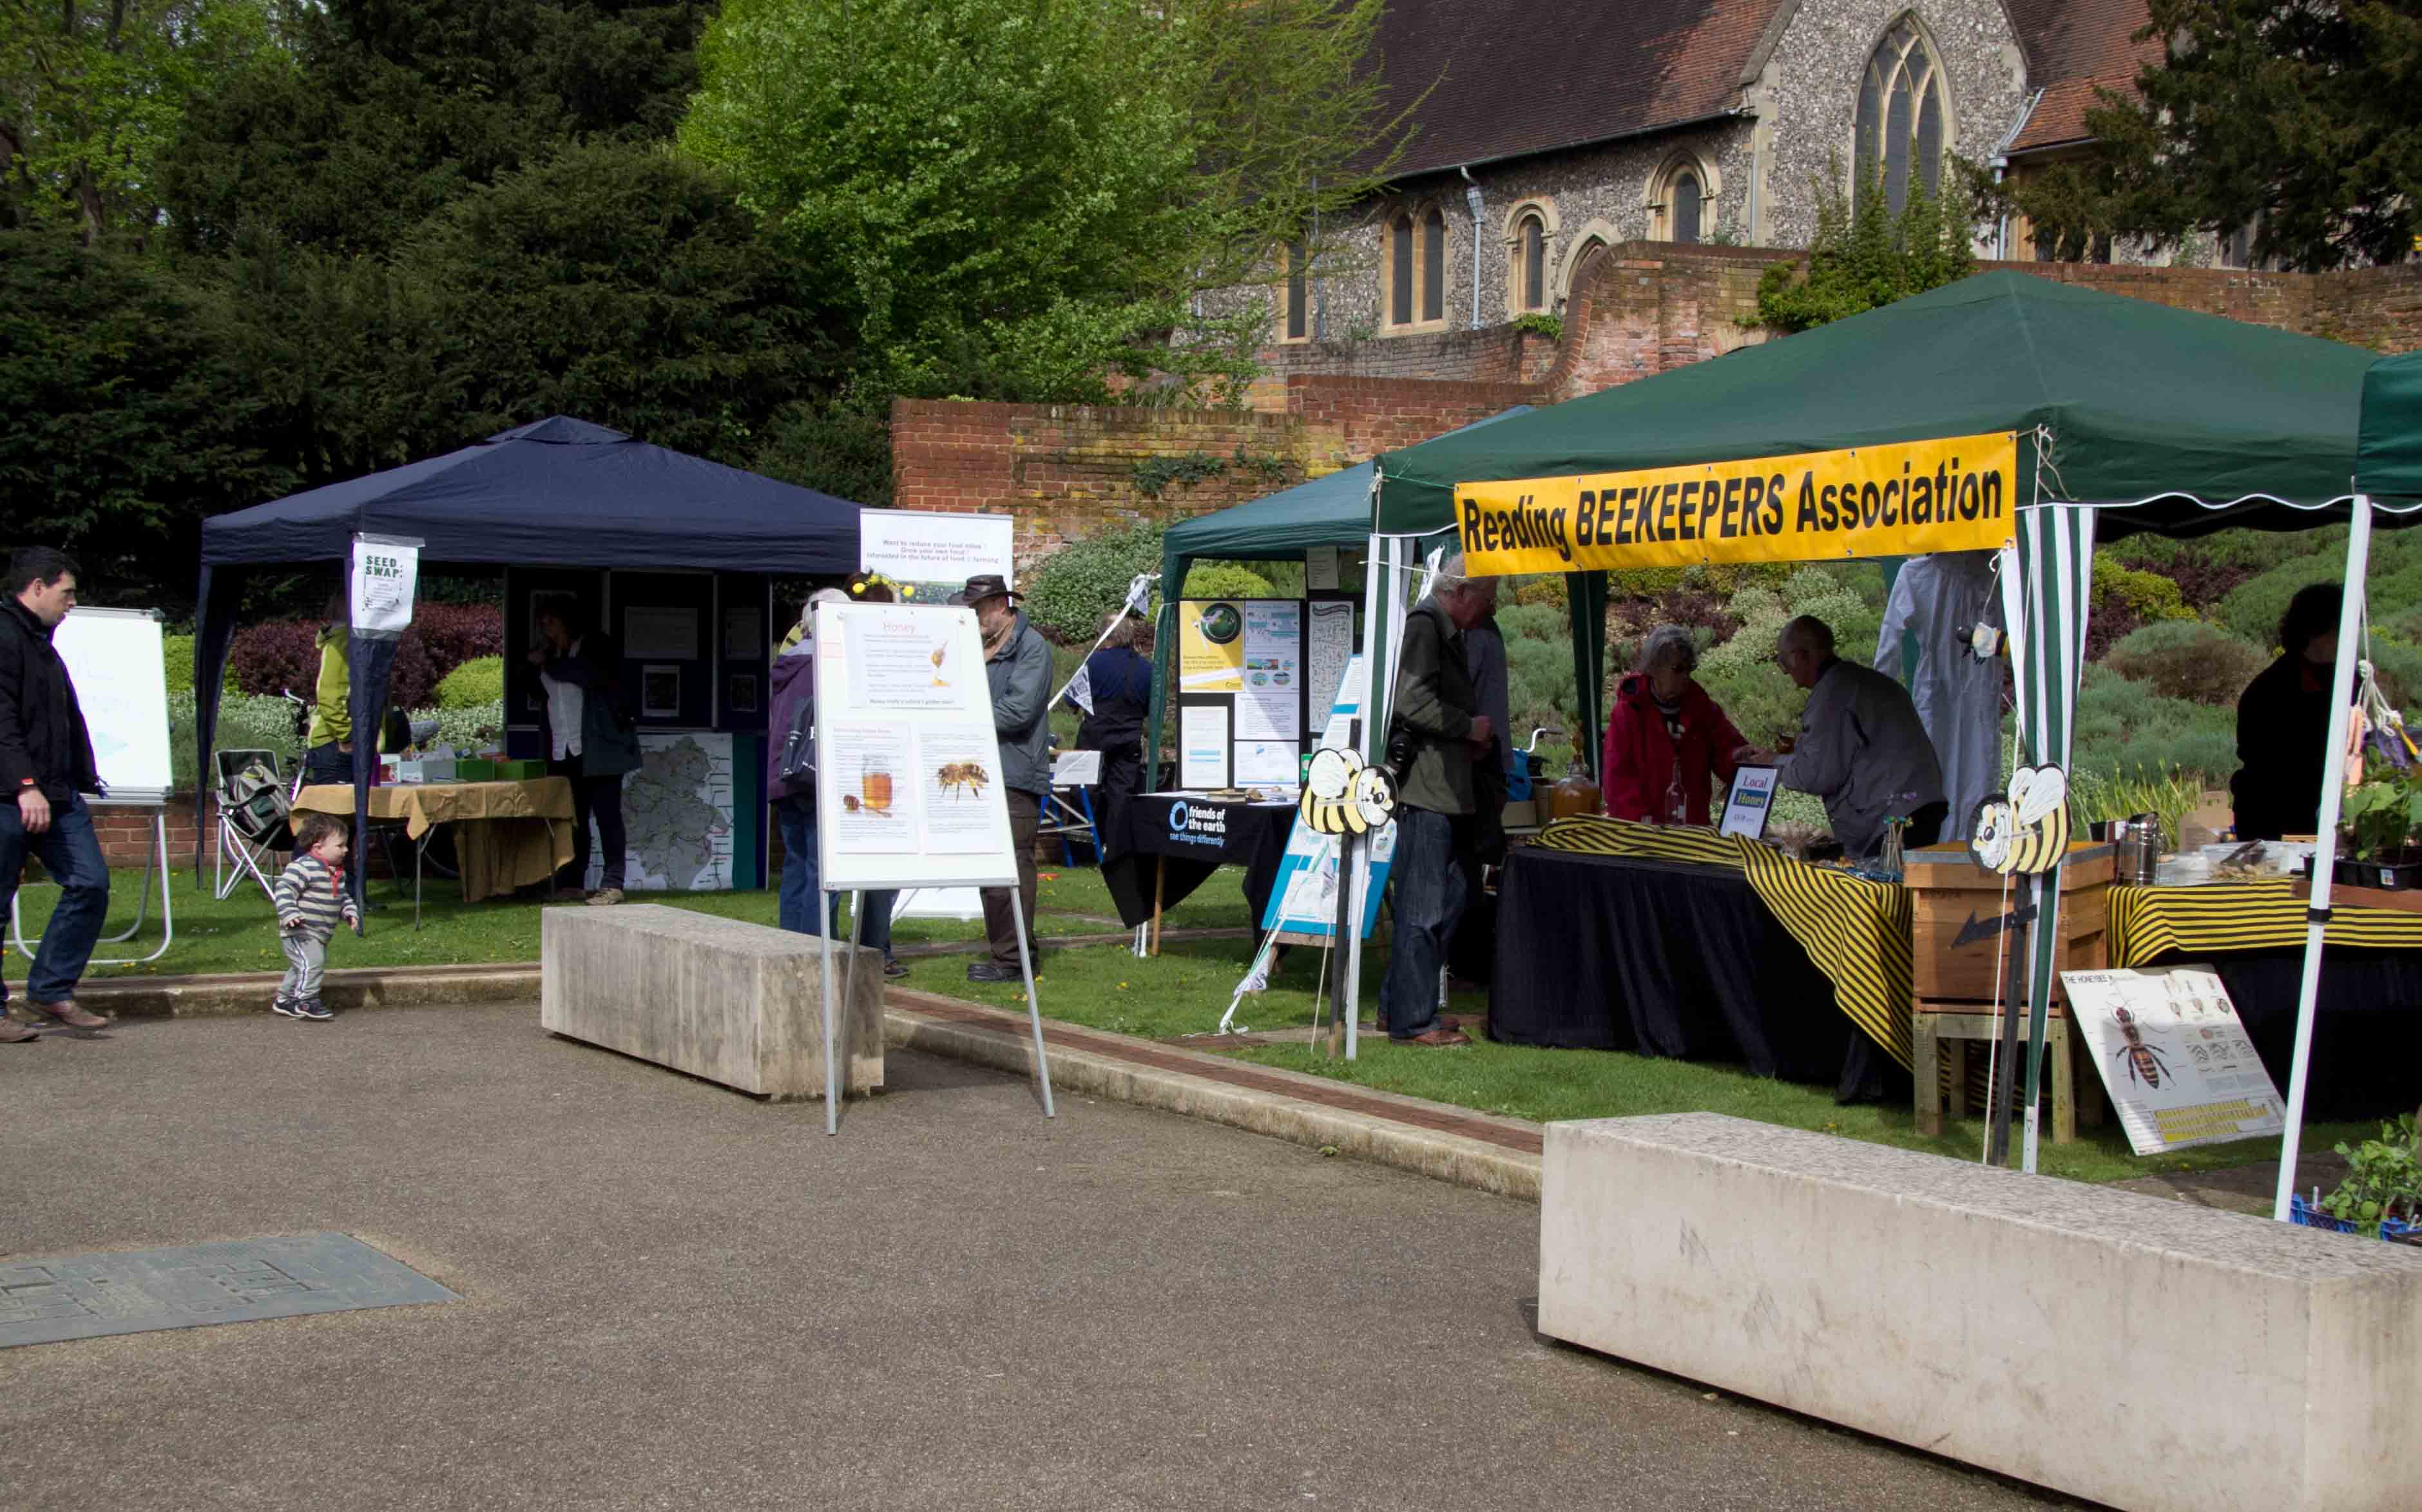 More stalls with that of Reading Beekeepers in foreground